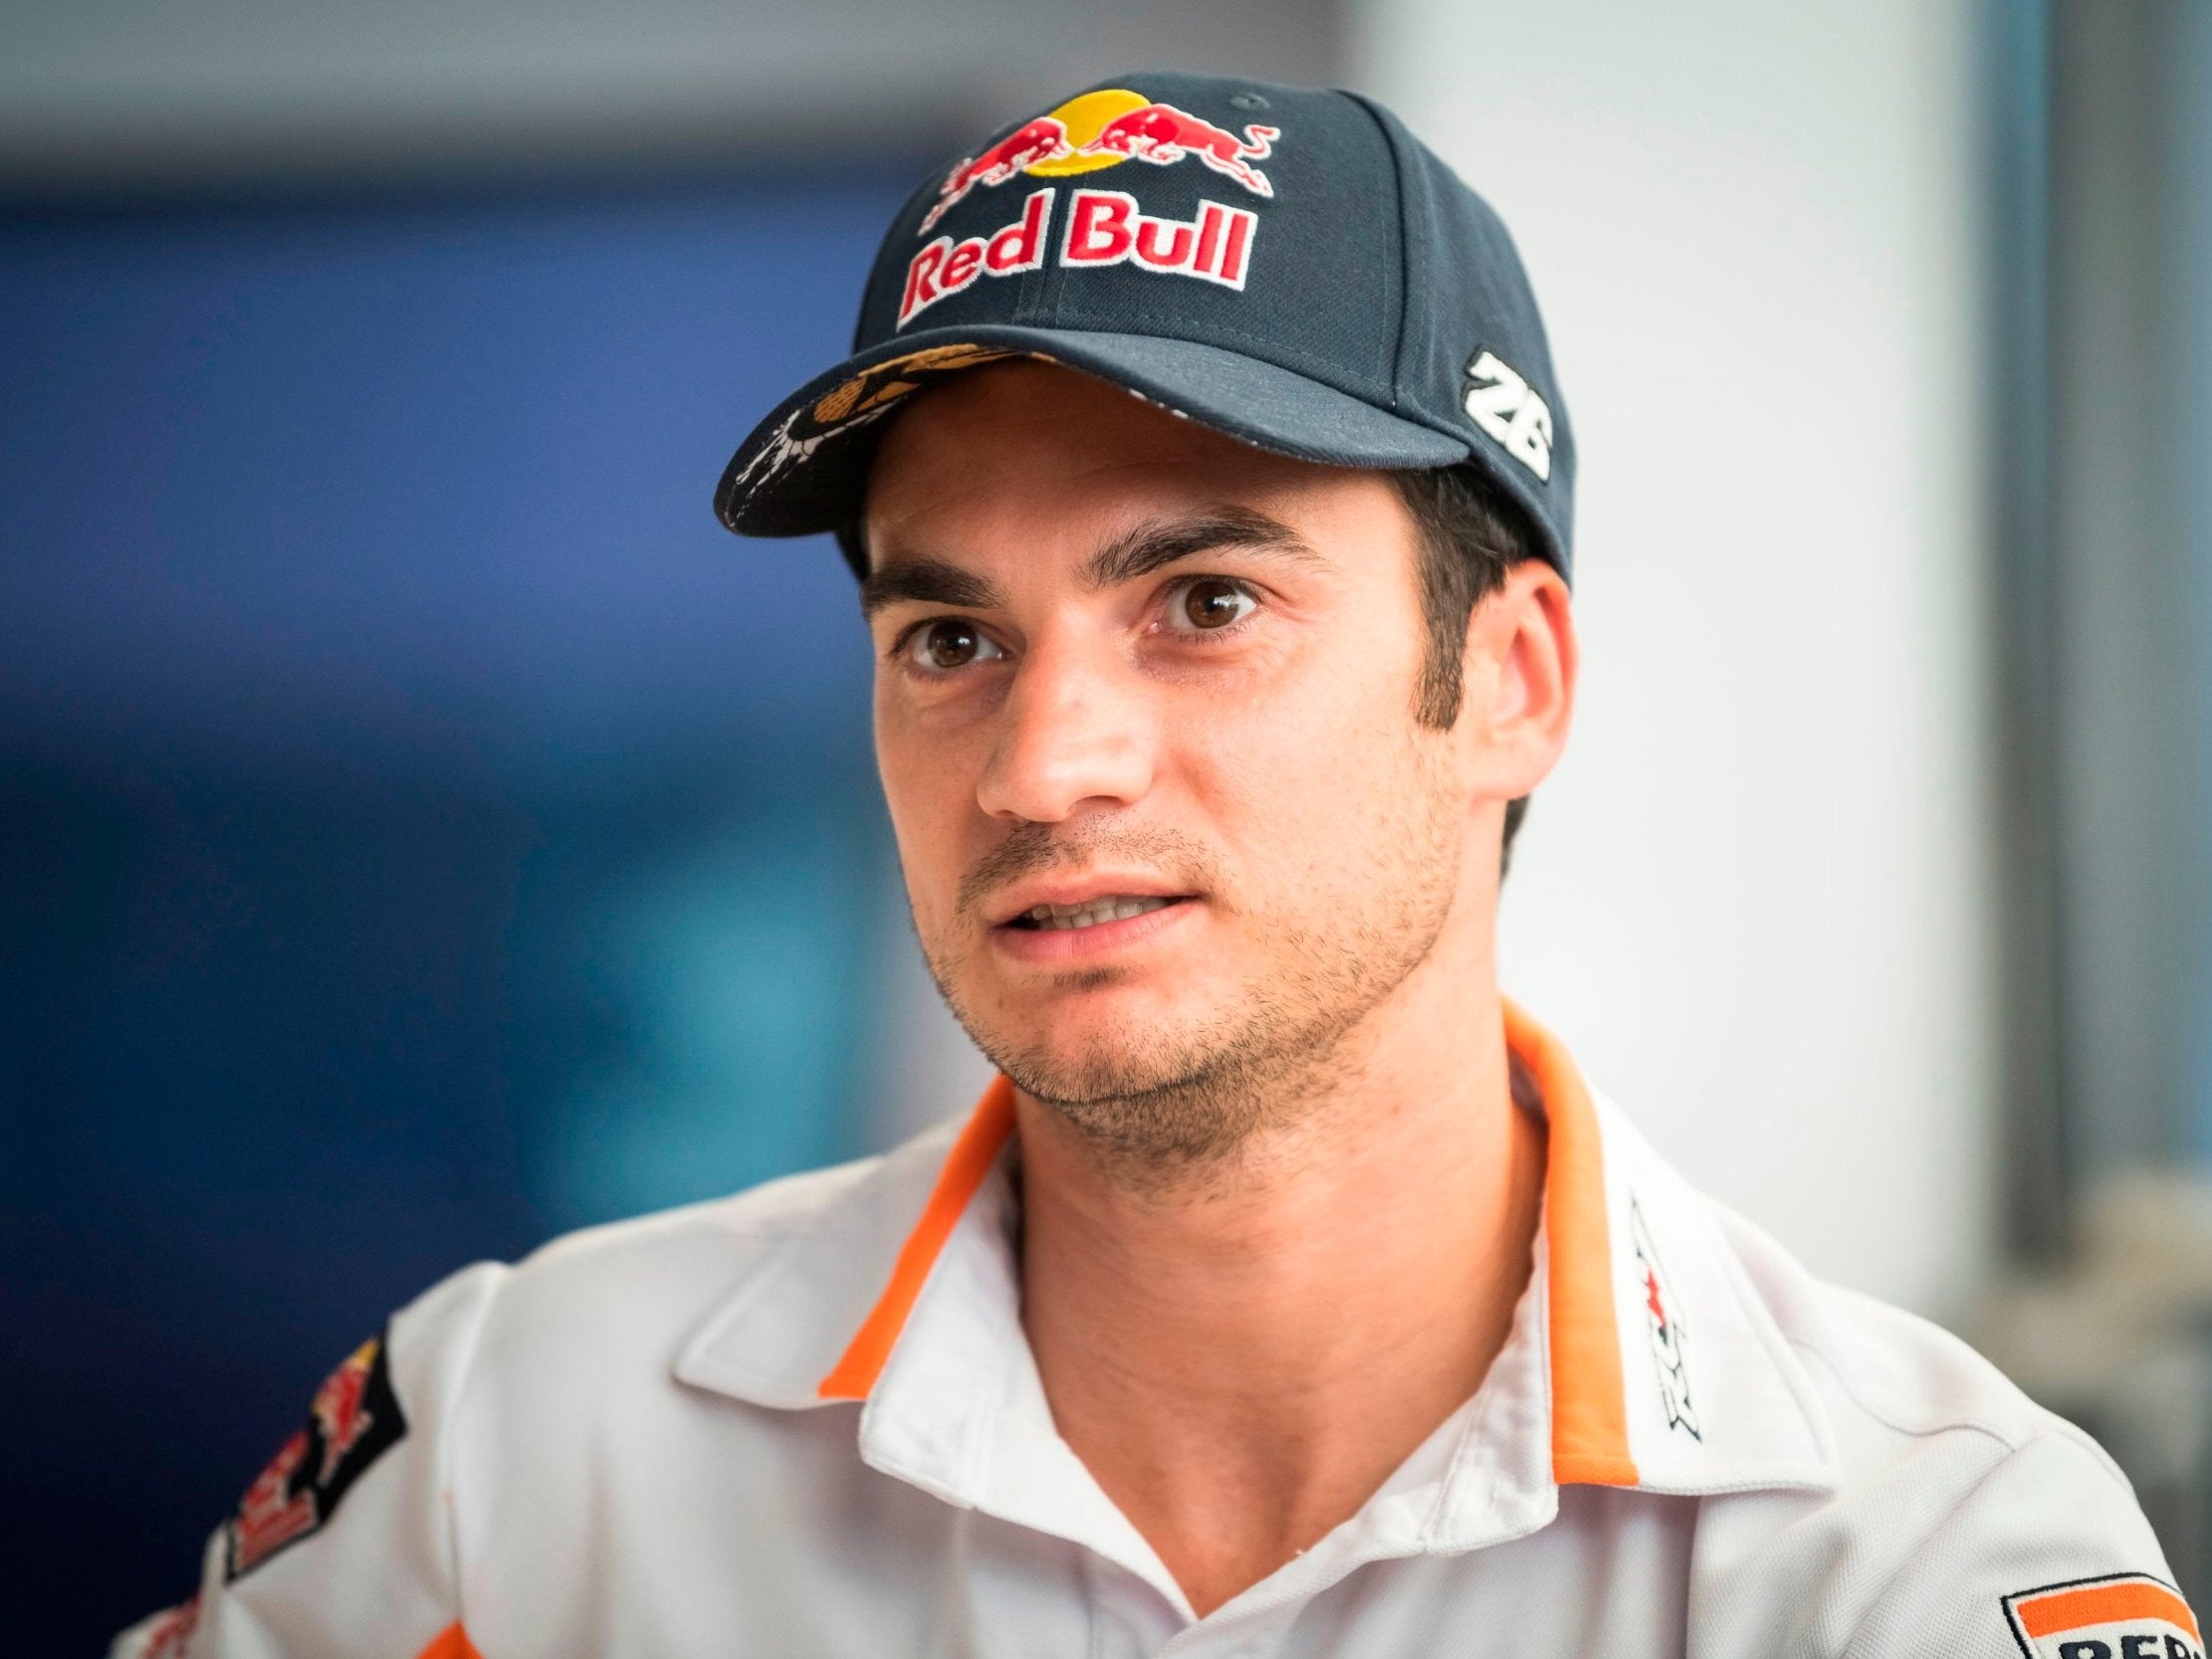 Dani Pedrosa reflected on his 18-year motorcycle career, his championship wins, near-misses, injuries and what he plans to do next year